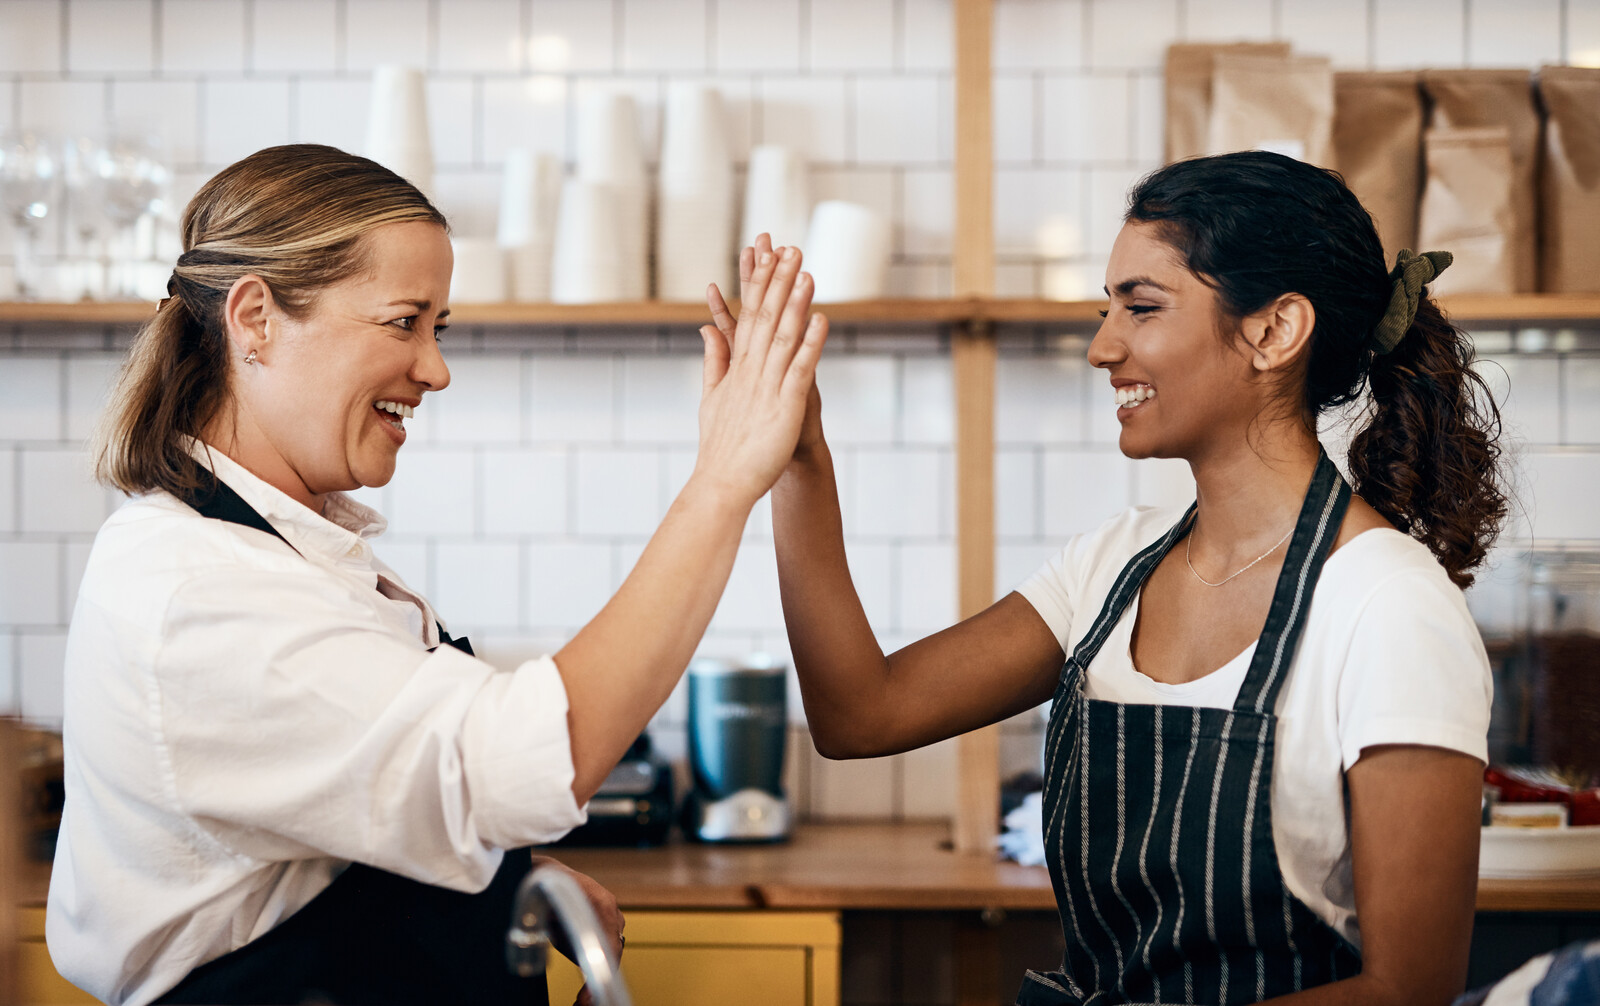 Multi unit restaurant employees giving each other a high five